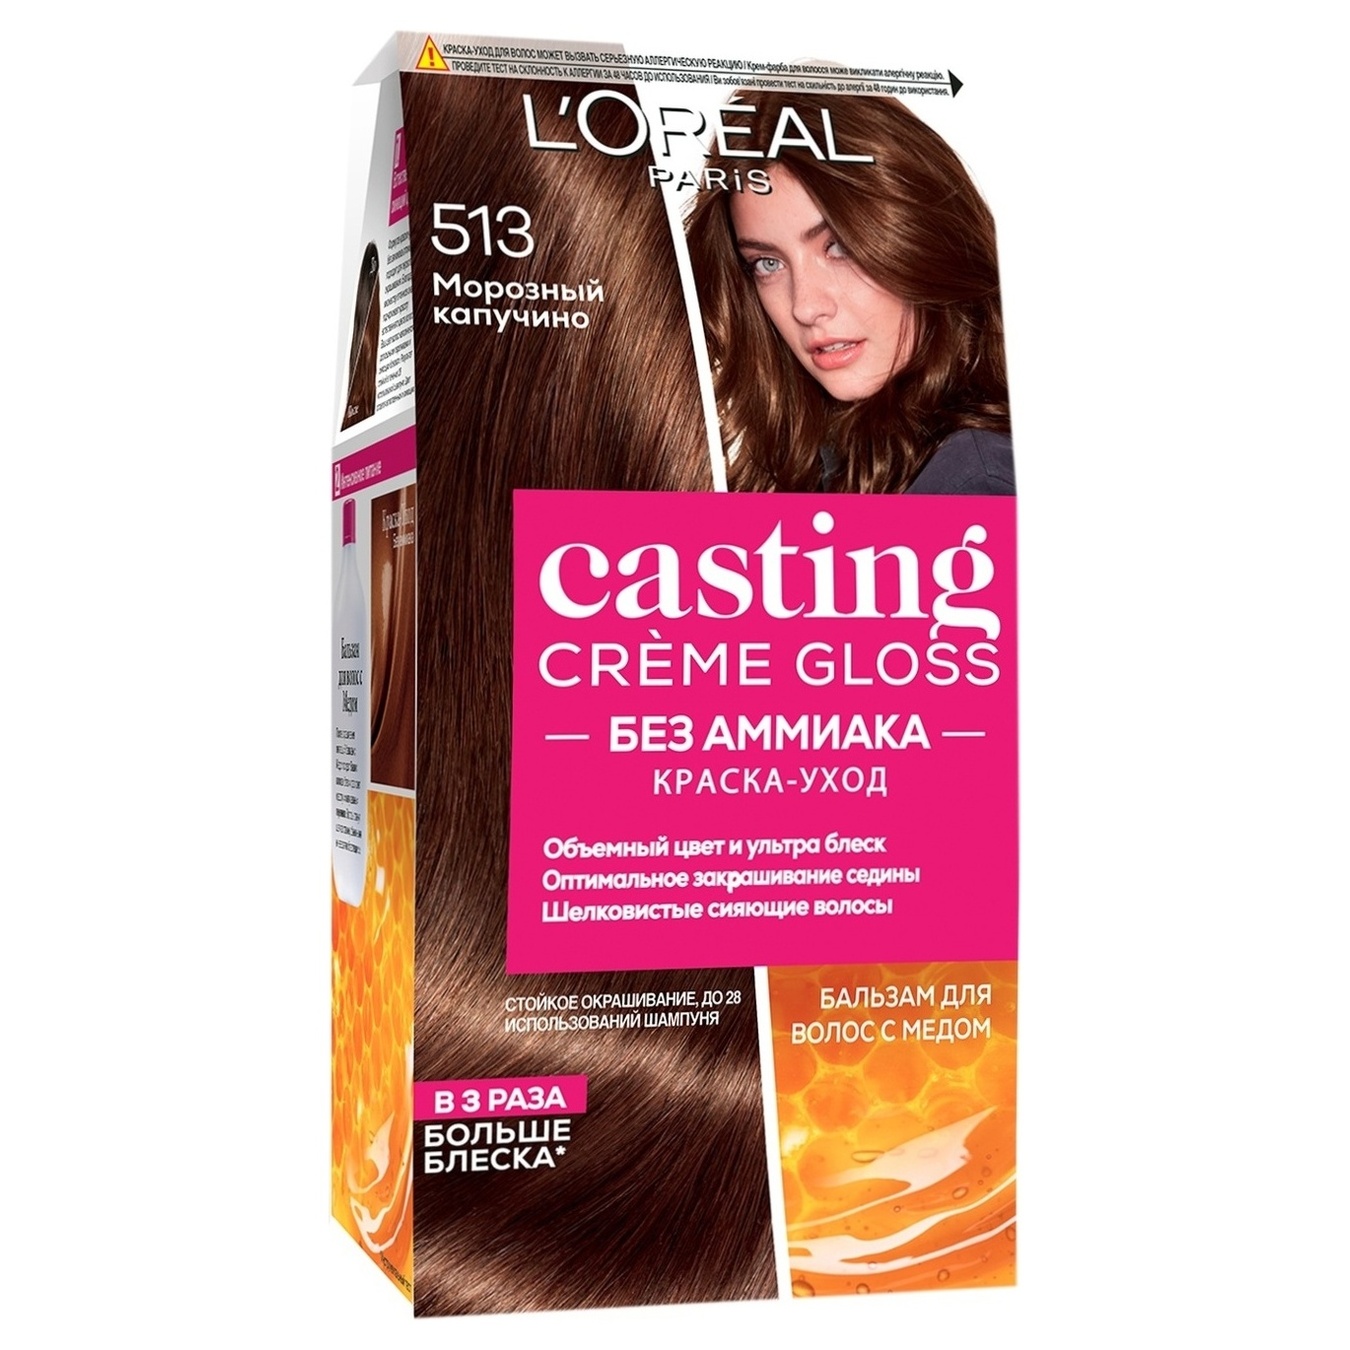 Creme dye for hair without ammonia L'Oreal Paris Casting Creme Gloss 513 frosty cappuccino